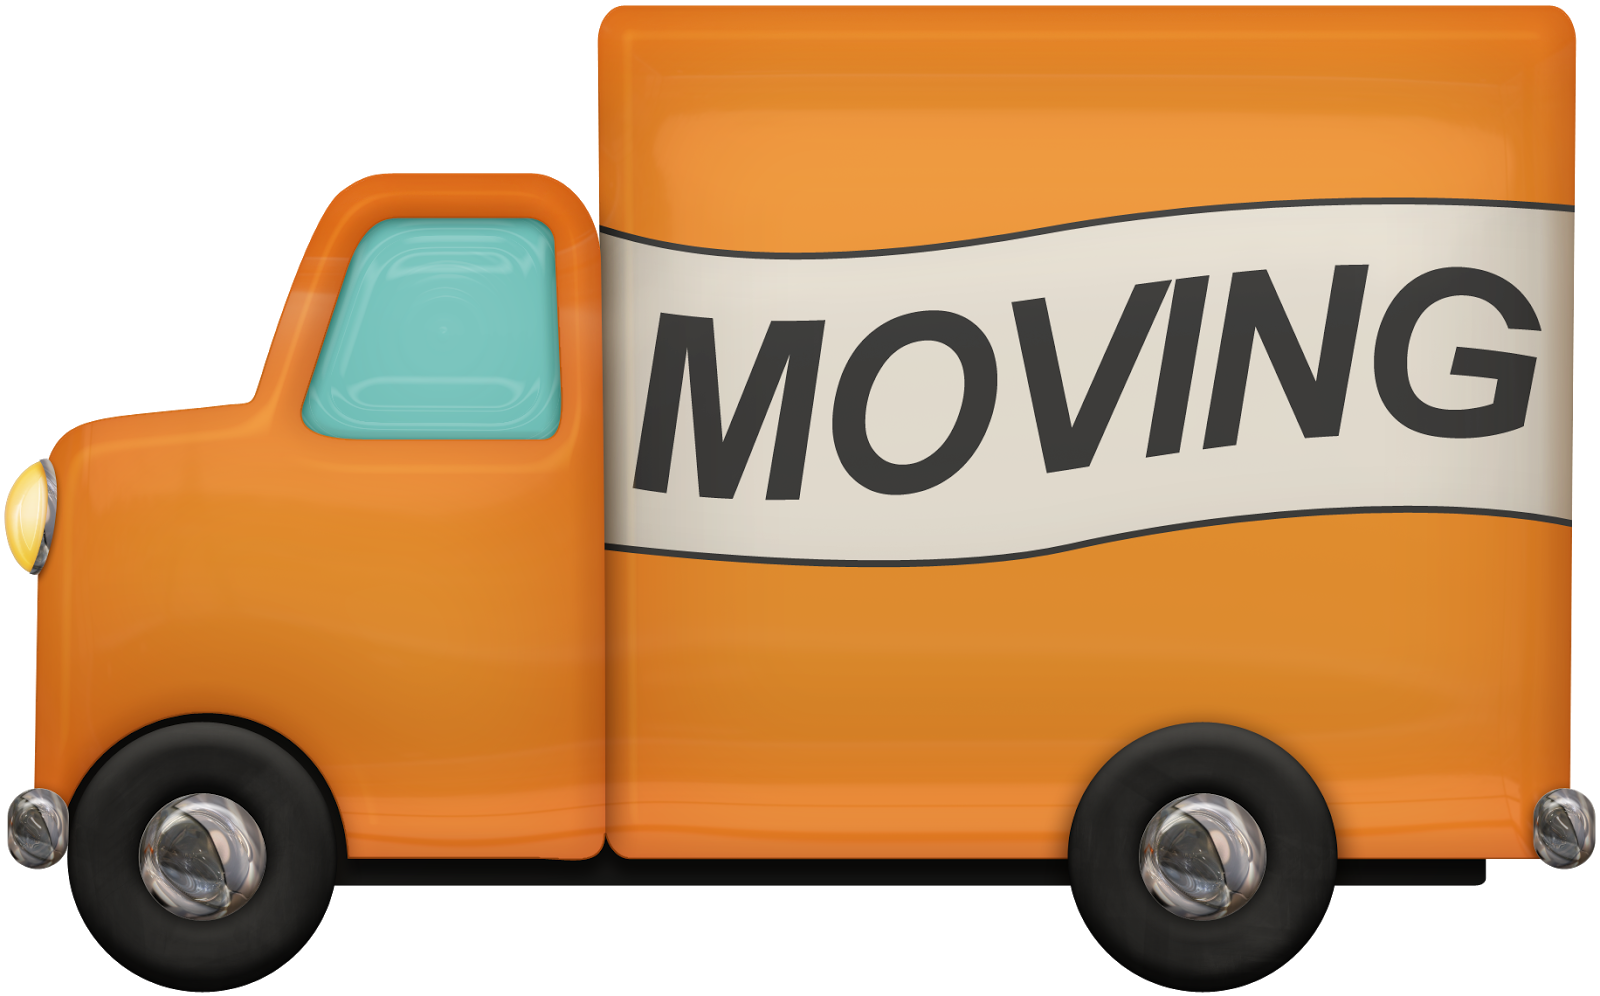 Moving Truck Clipart - The Cliparts